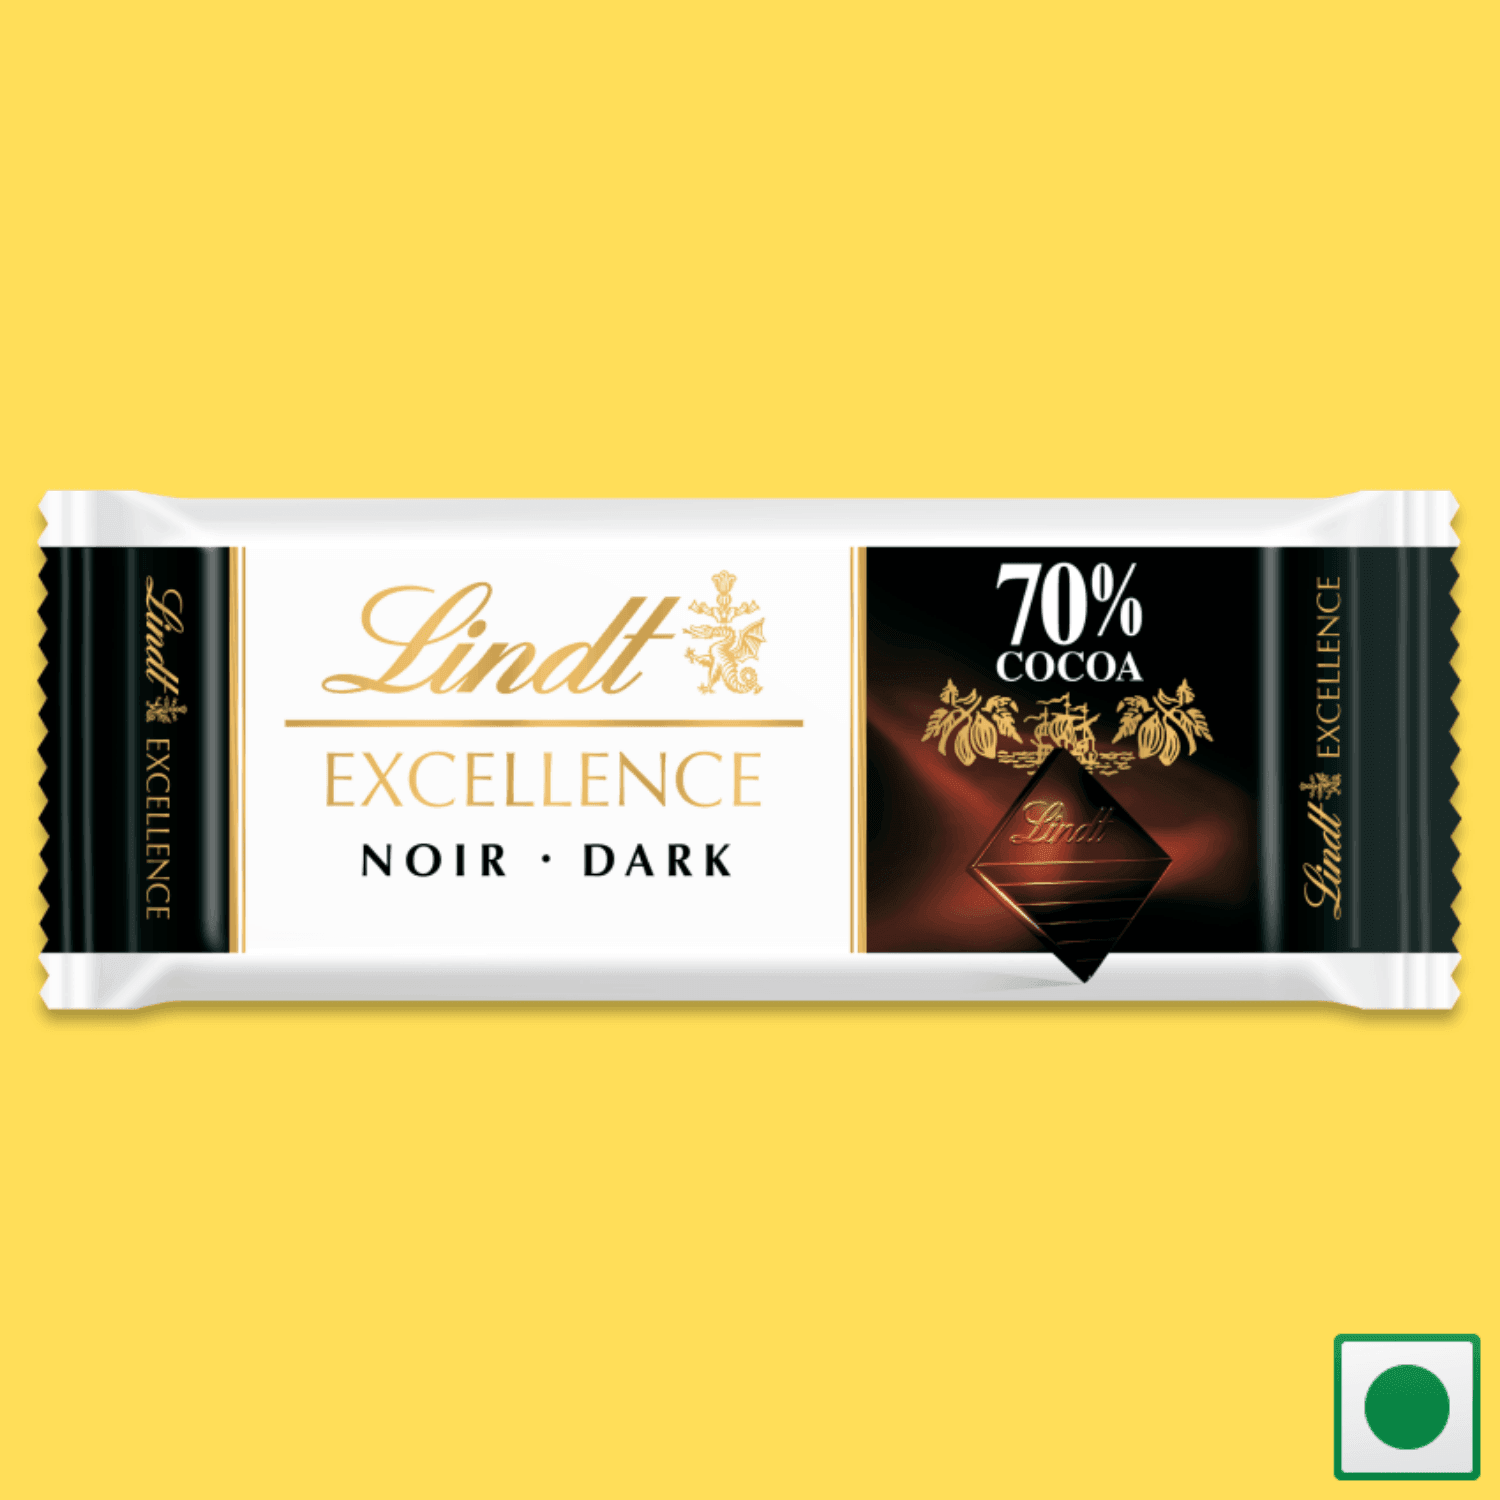 Lindt Excellence Dark 70% Cocoa, 35g (Imported) - Super 7 Mart